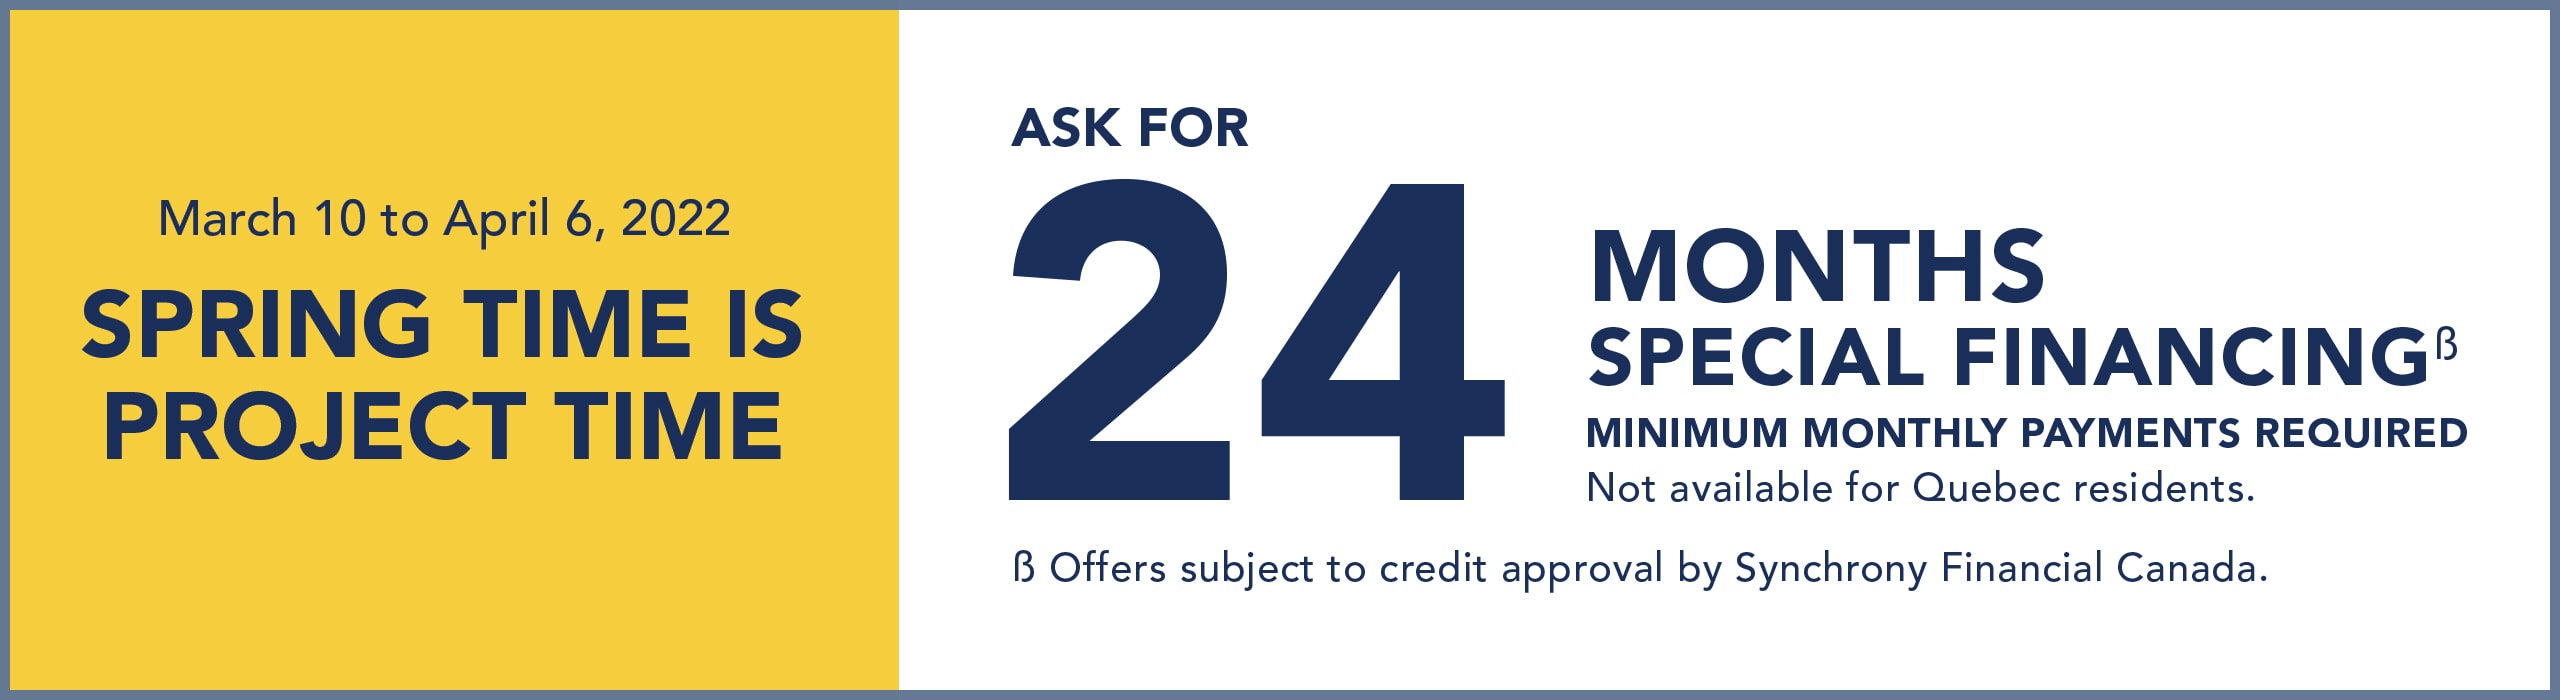 Until April 6, ask for 24 months special financing. Minimum monthly payments required.